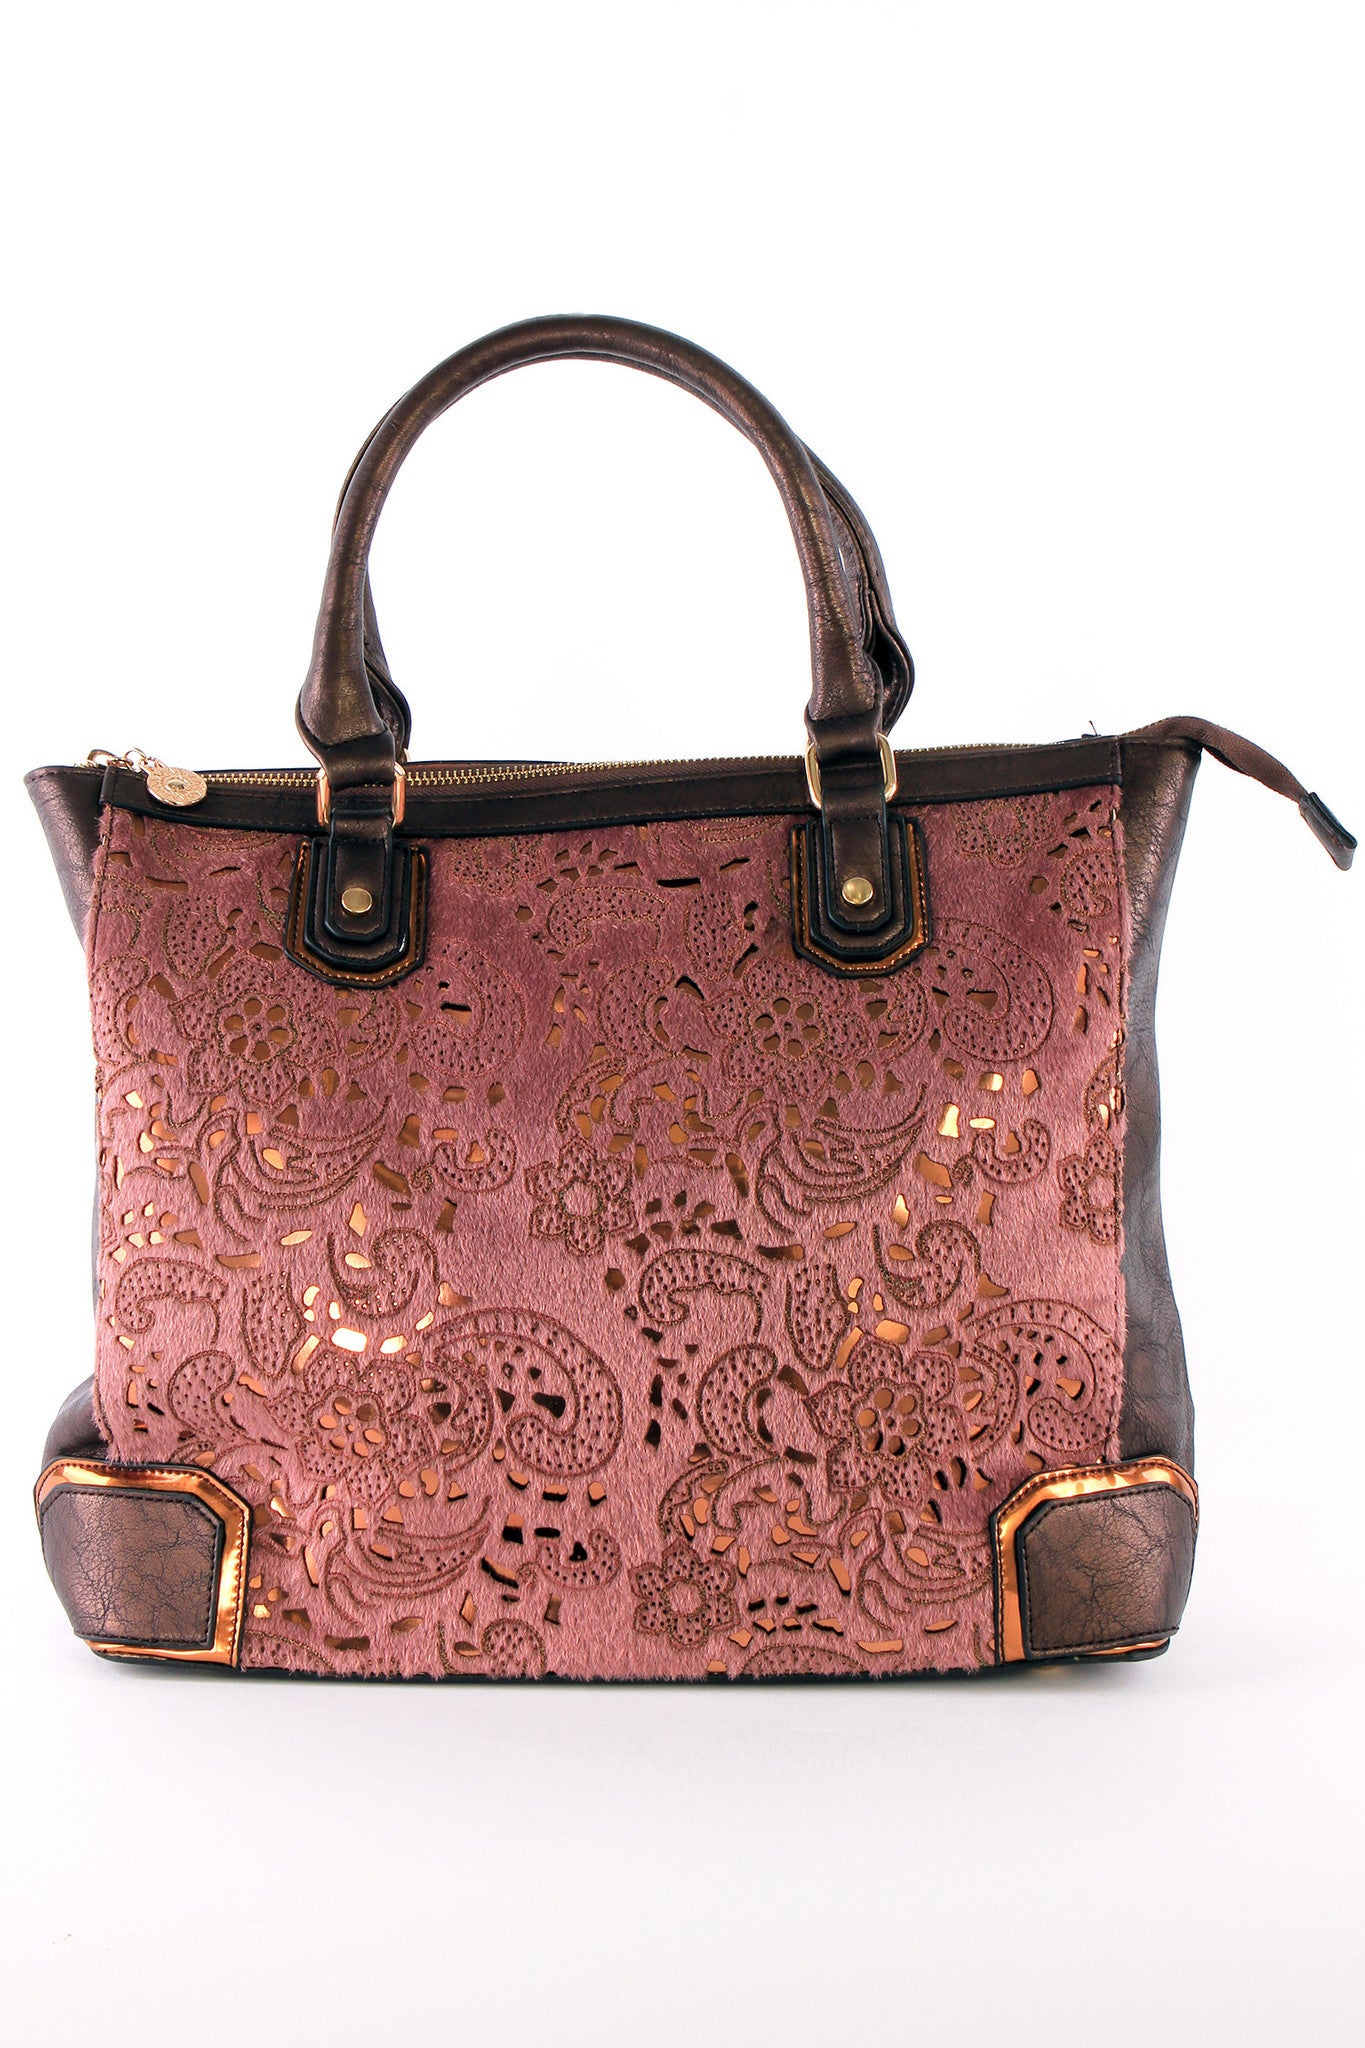 Panelled, Lace Insert Tote Bag